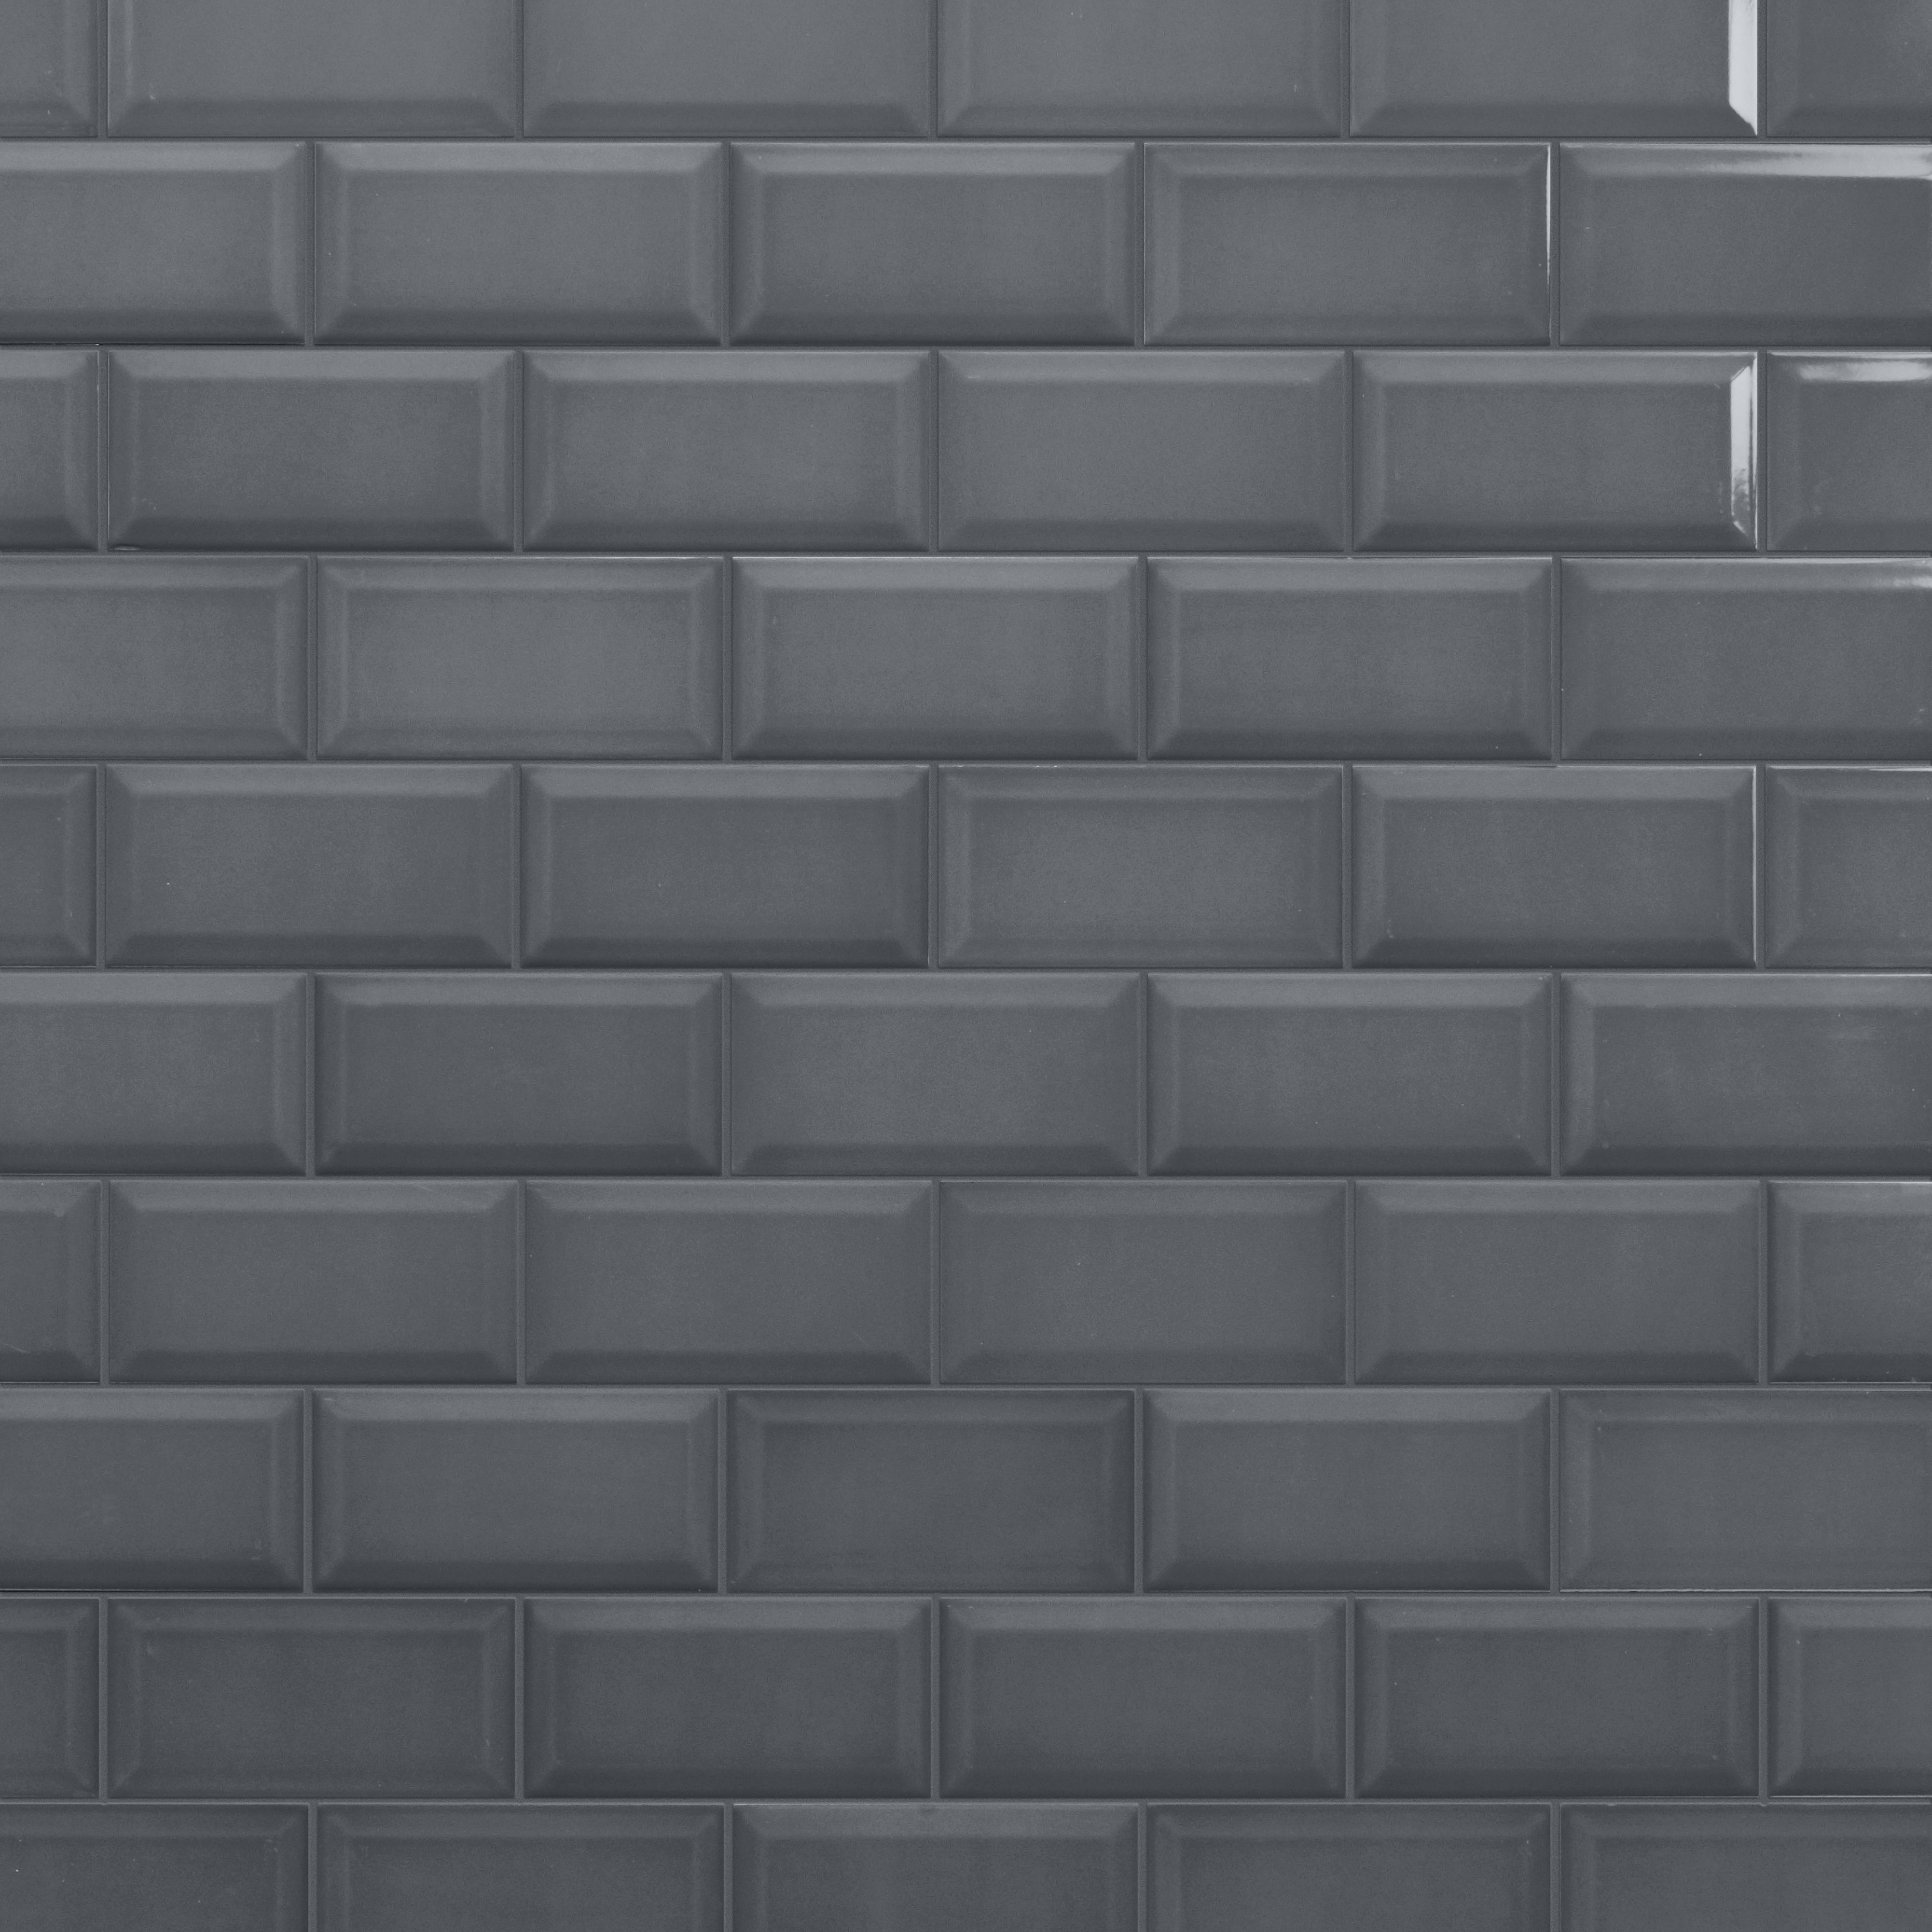 Trentie Anthracite Gloss Metro Ceramic Wall Tile, Pack of 40, (L)200mm (W)100mm